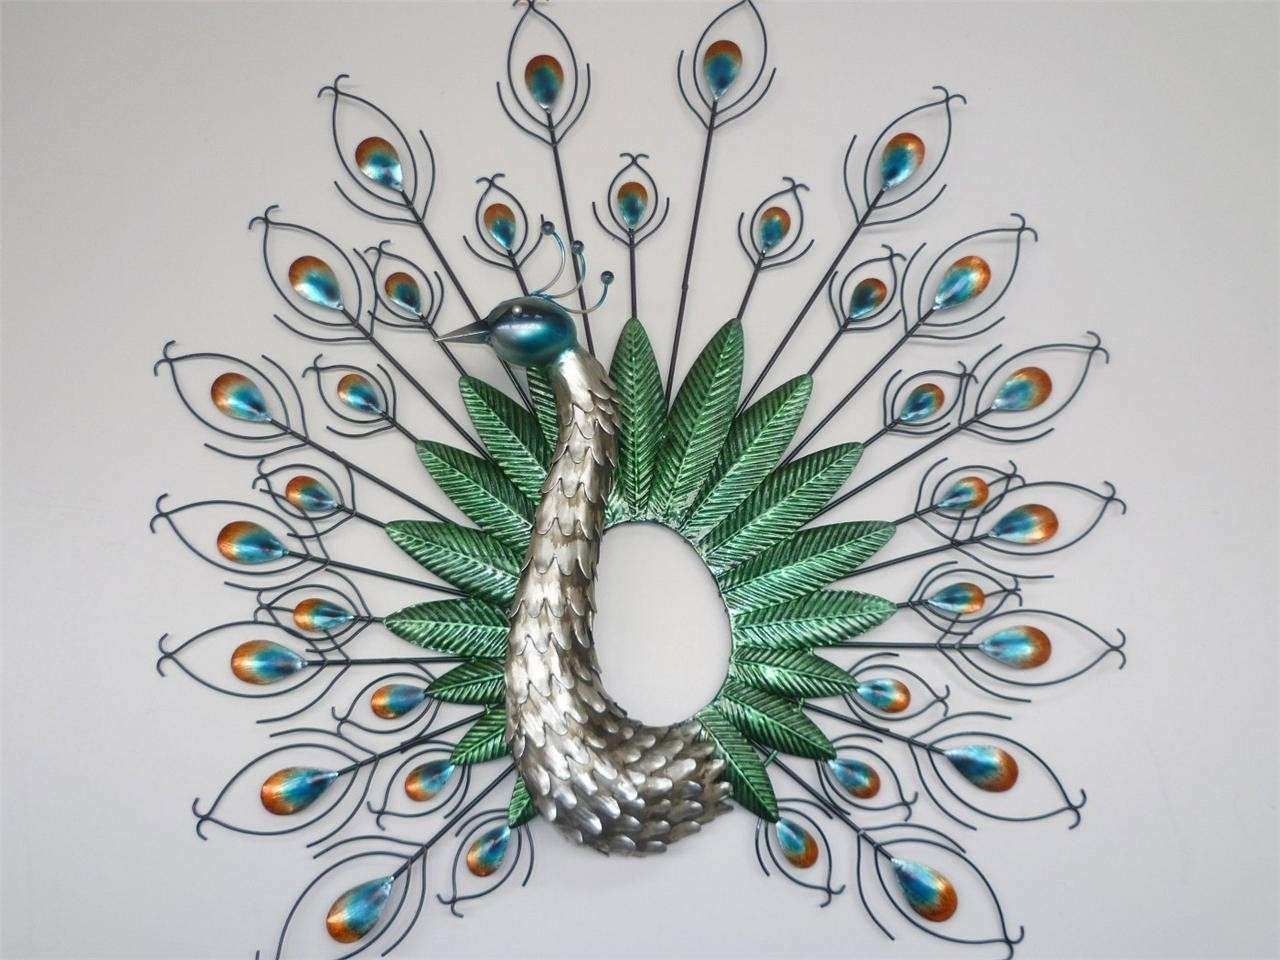 Peacock Wall Decor Elegant The Gallery For Metal Peacock Wall Art Regarding Peacock Wall Art (View 5 of 20)